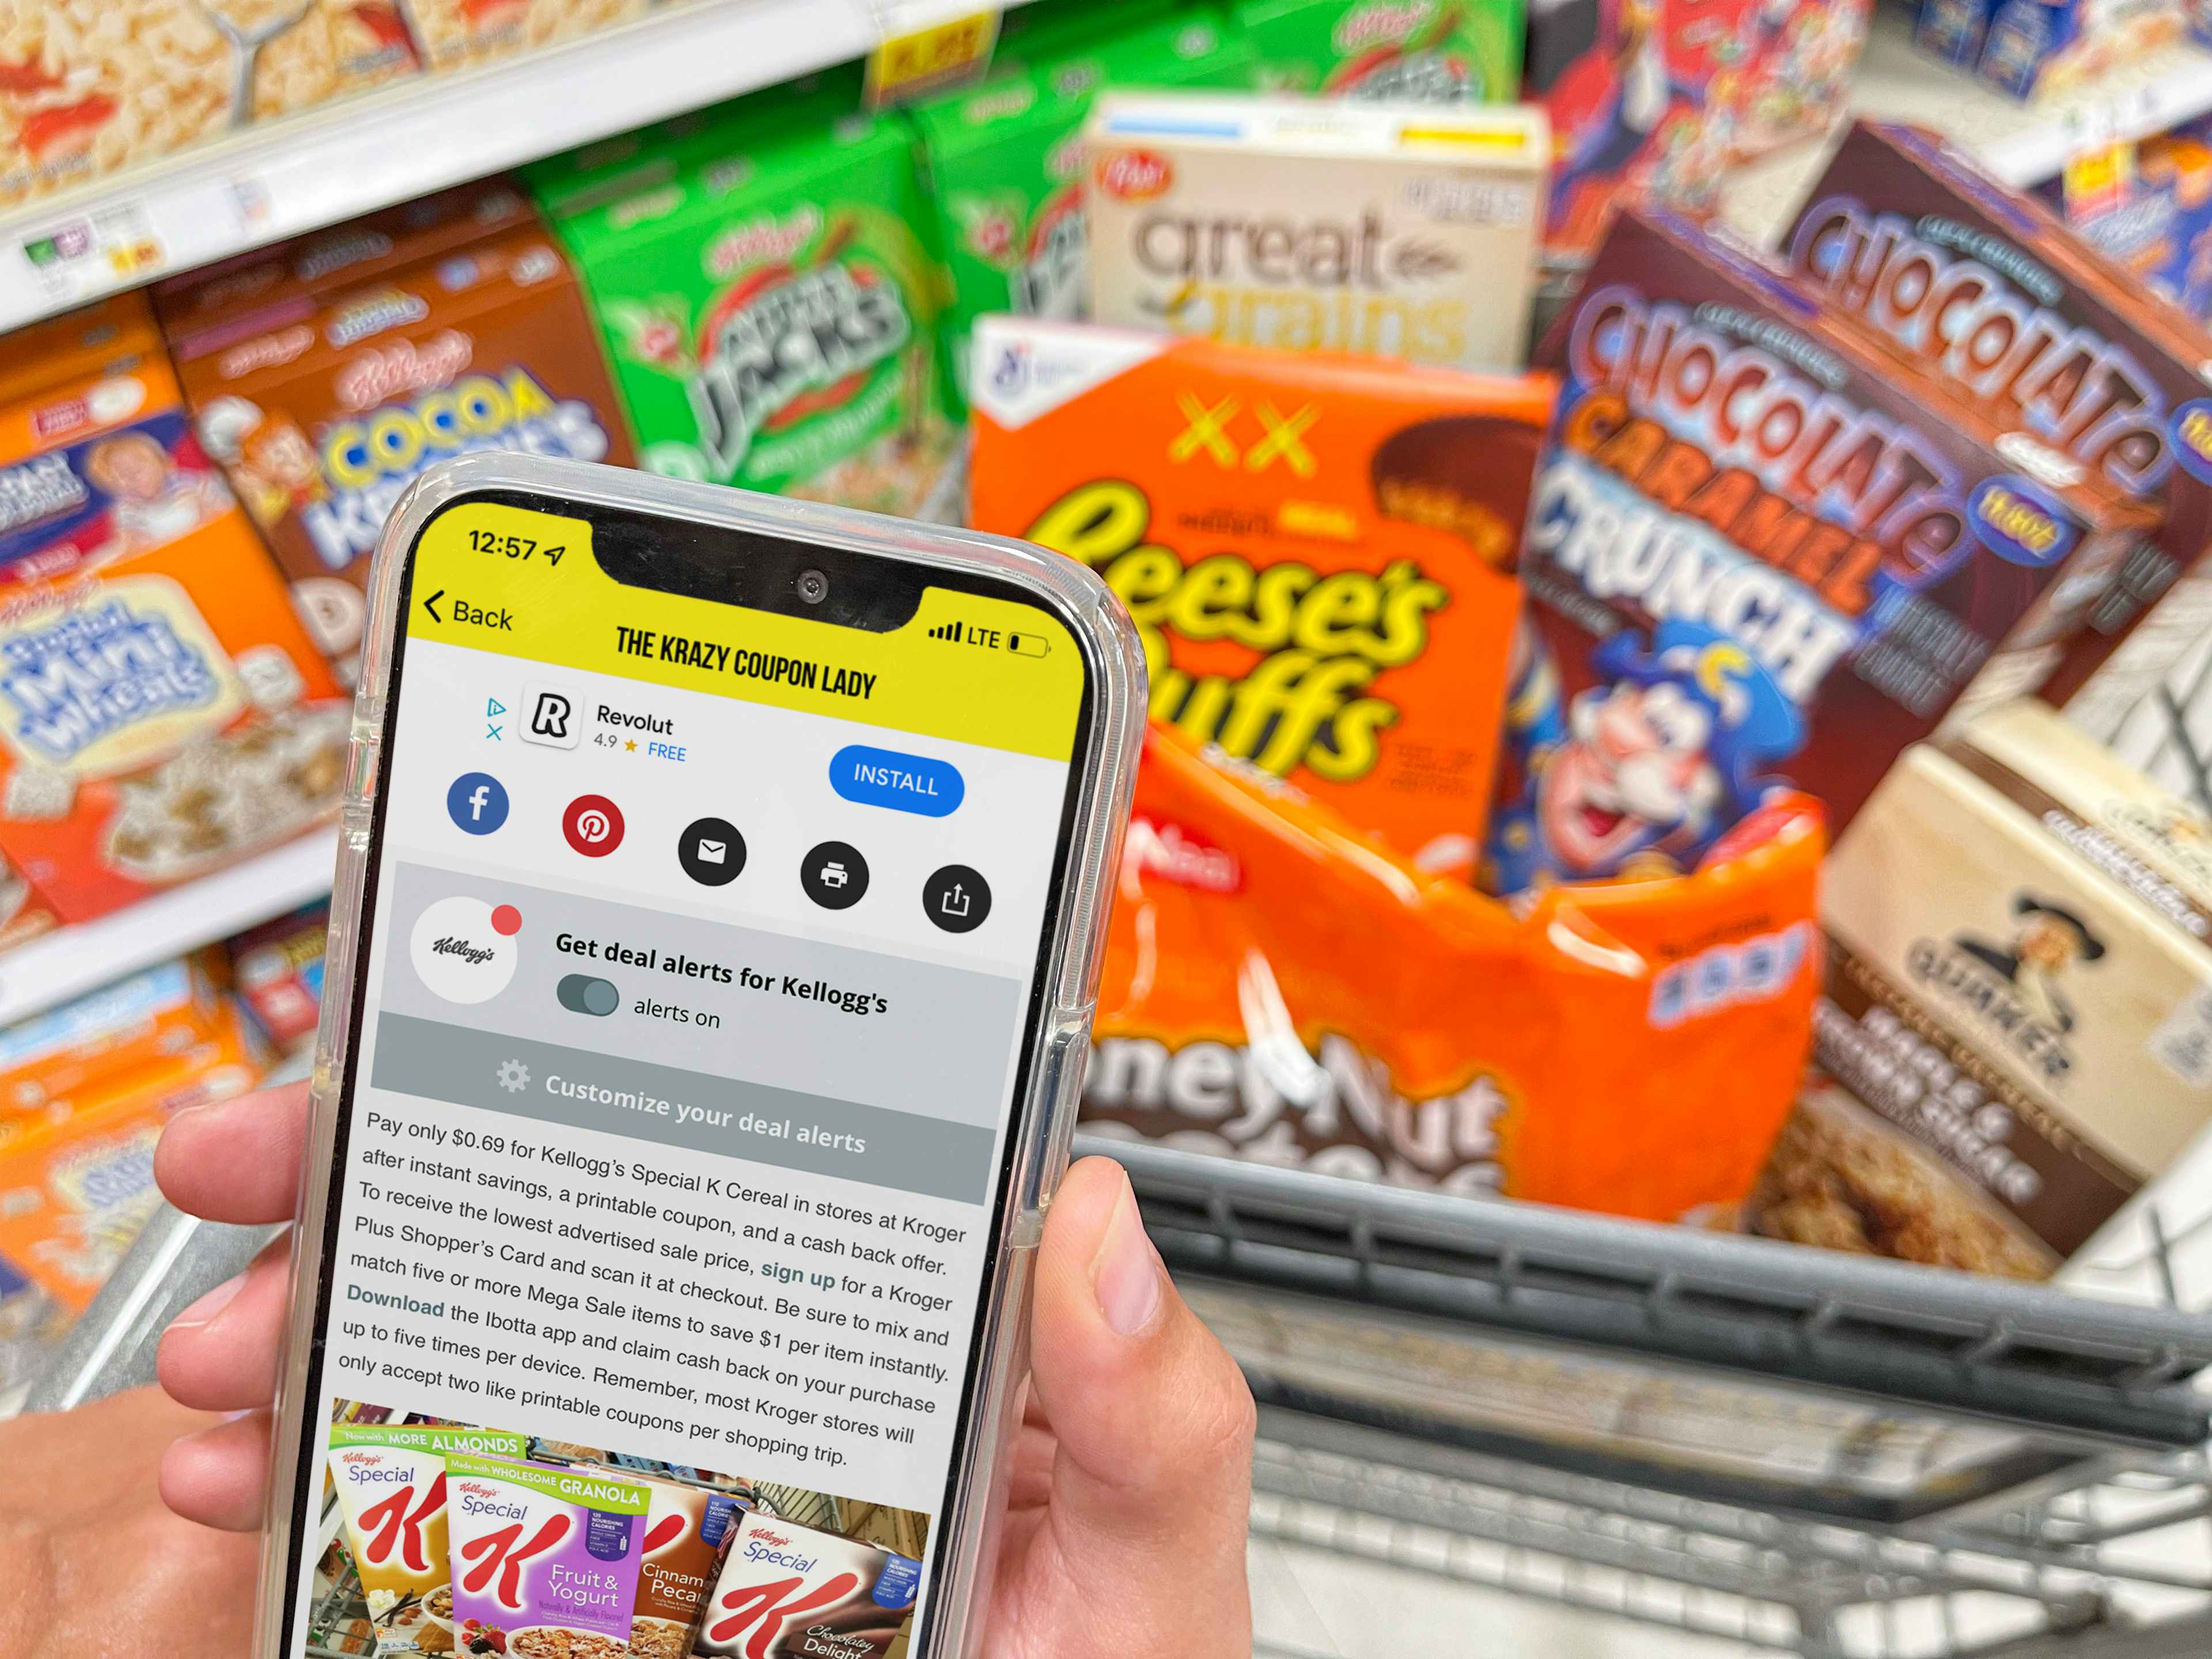 A person's hands holding a cellphone displaying the Krazy Coupon Lady mobile app's page for Kellogg's deals in front of a cart full of ...